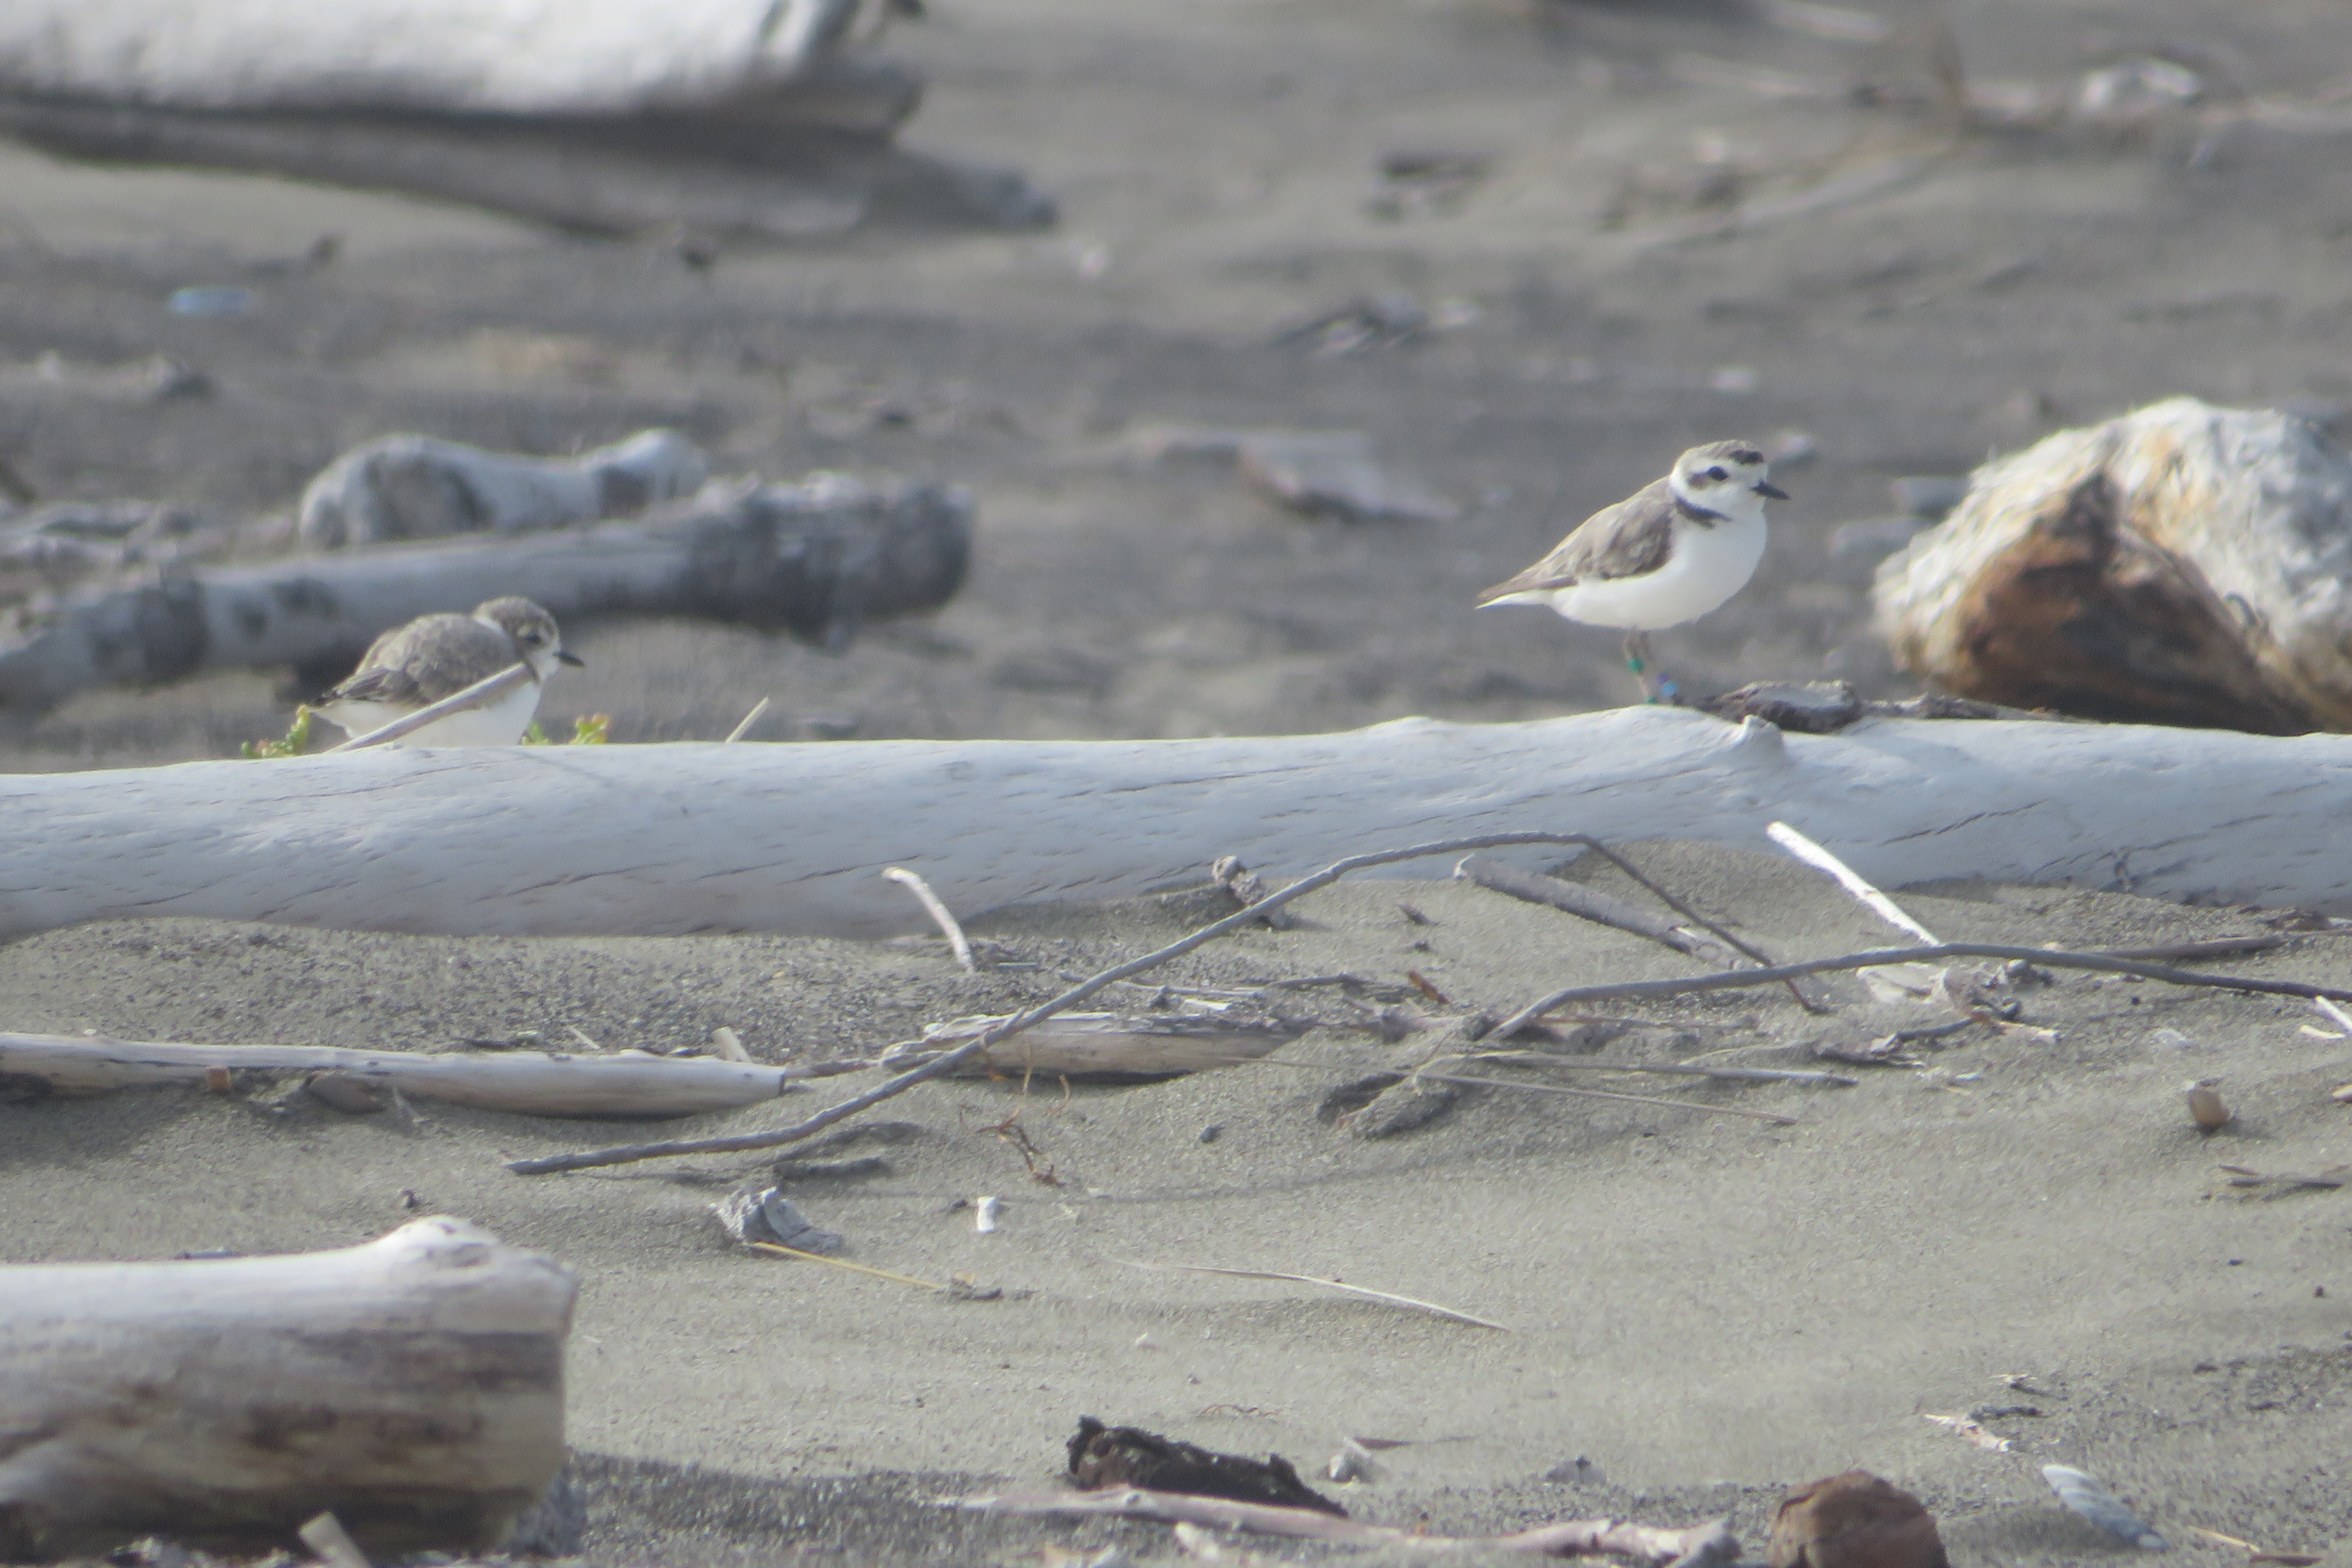 A photo of two small grayish-brown shorebirds standing on a piece of driftwood on a sandy beach.